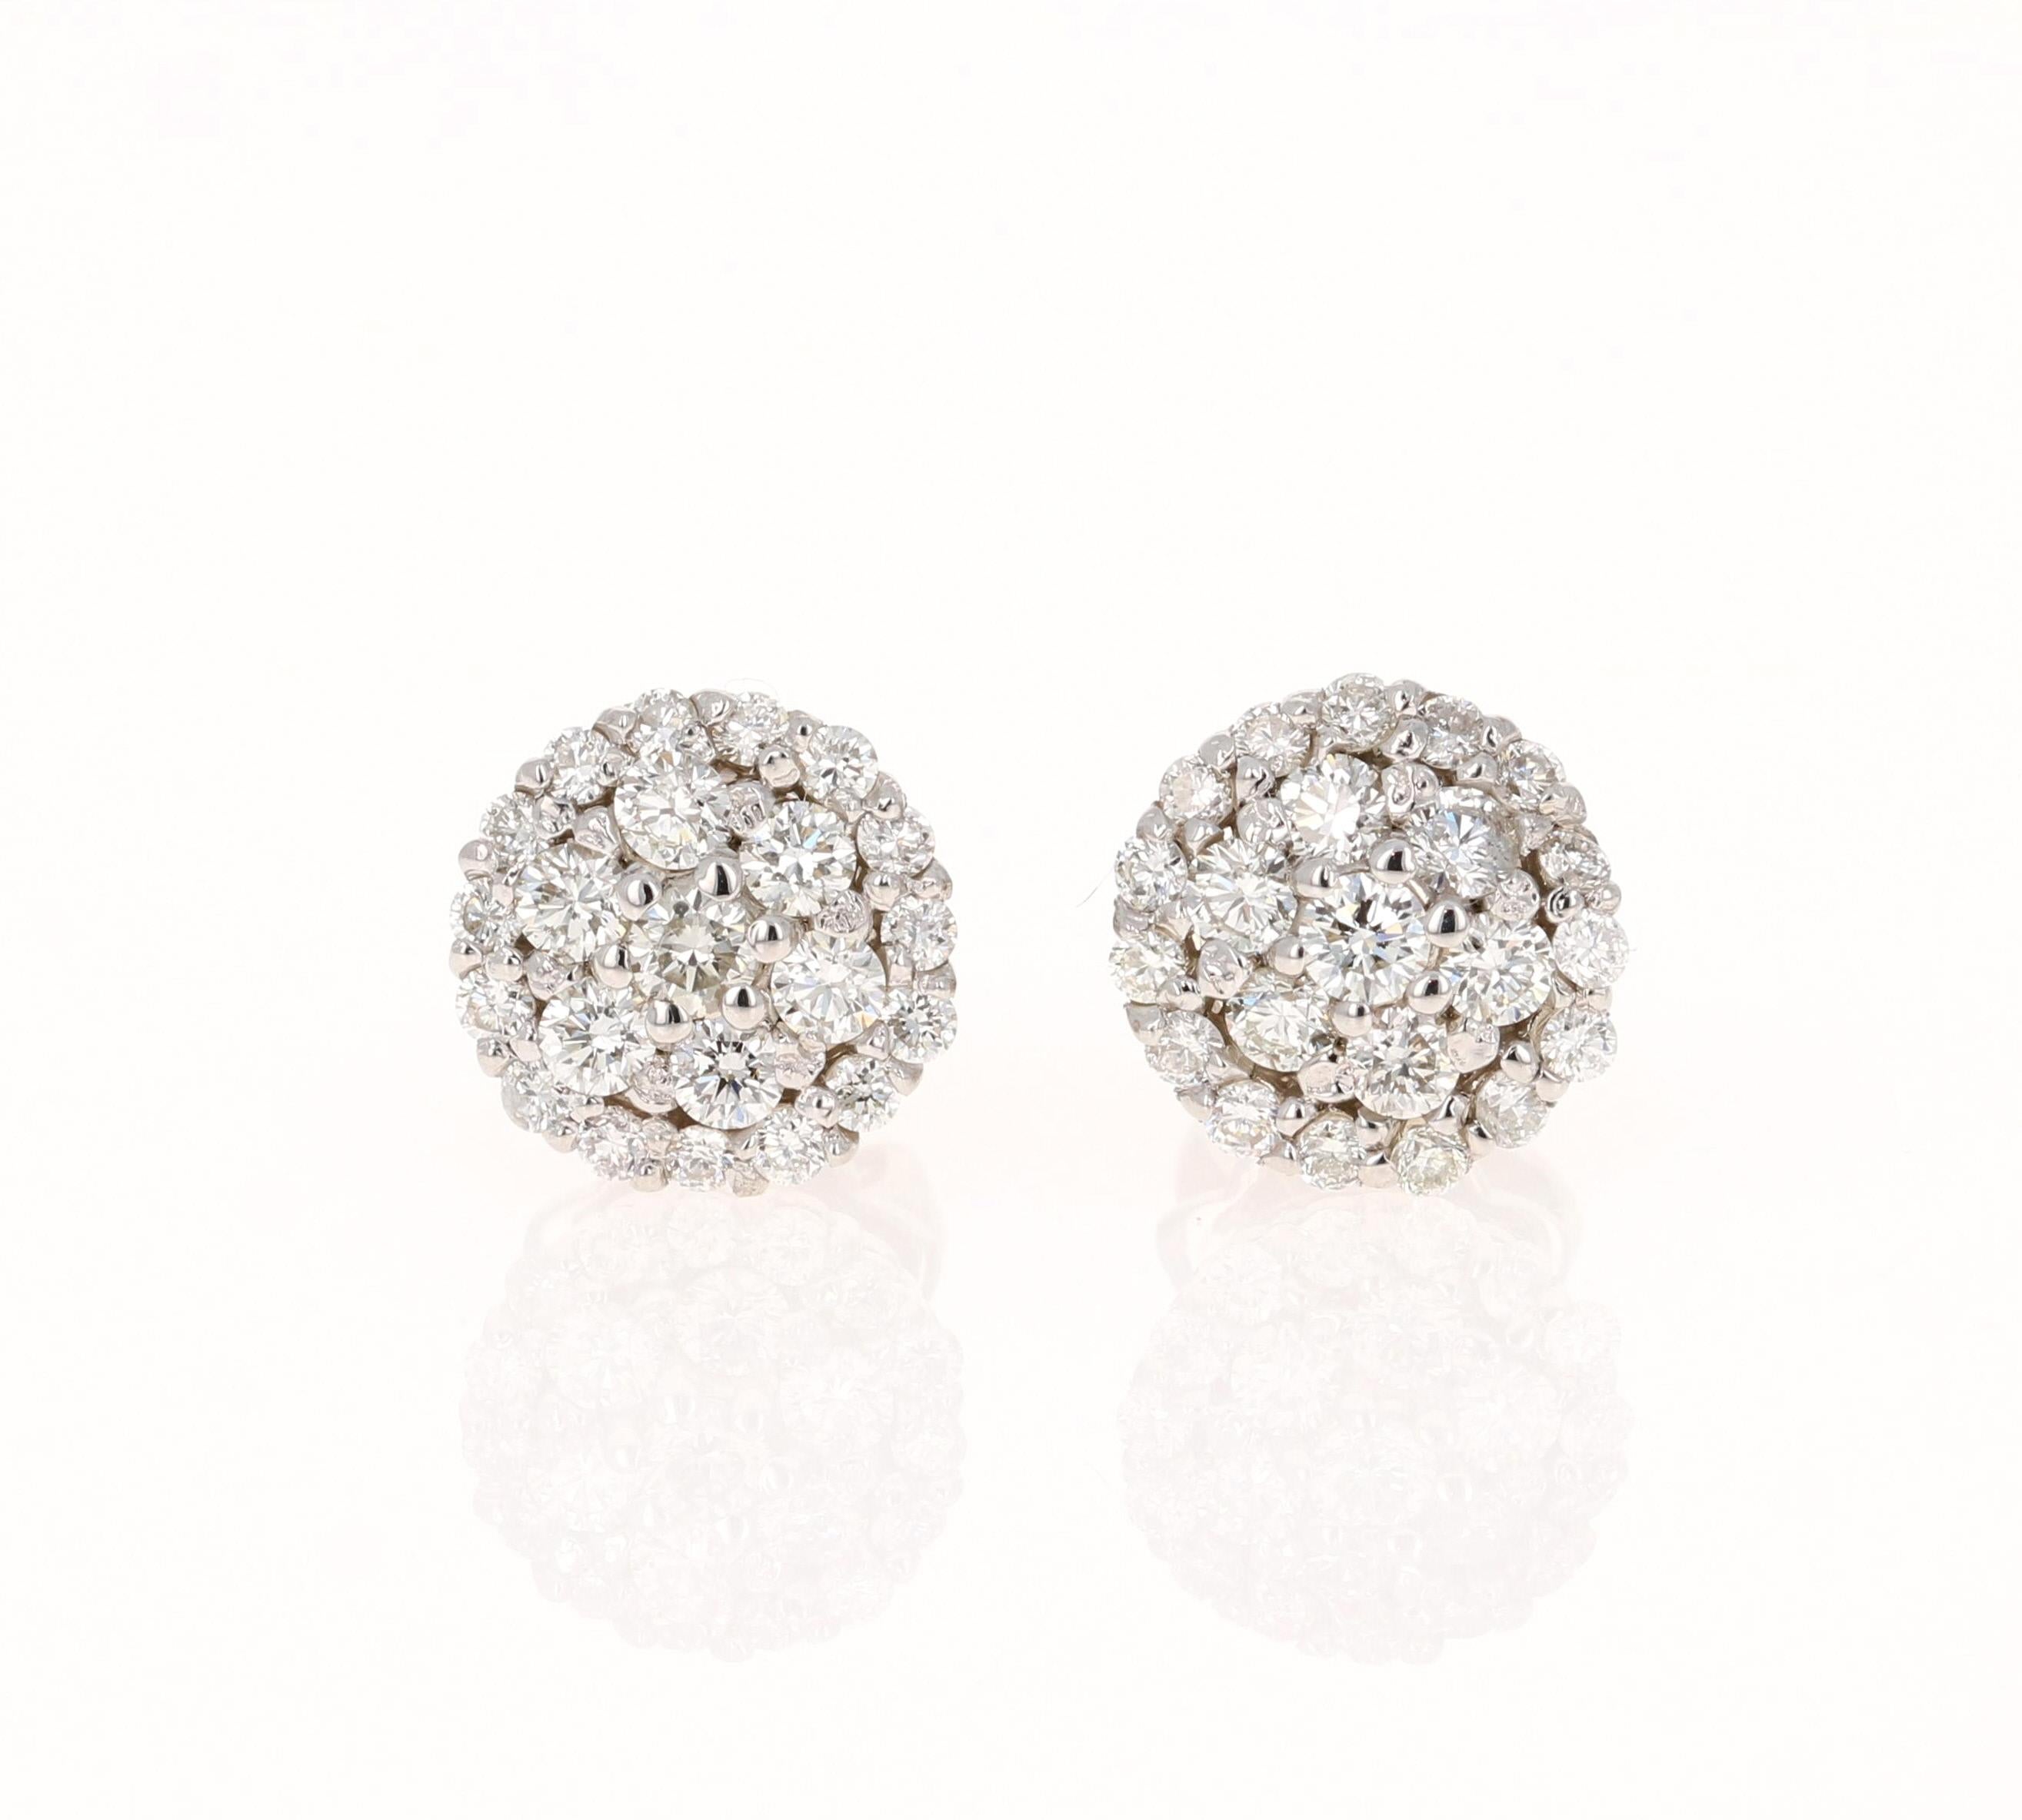 These earrings have 44 Round Cut Diamonds that weigh 0.72 carats. The clarity is VS and color is H. The width of the earrings are approximately 8.5 mm

The backing of the earring is a standard push back. The Earrings are made in 14K White Gold and